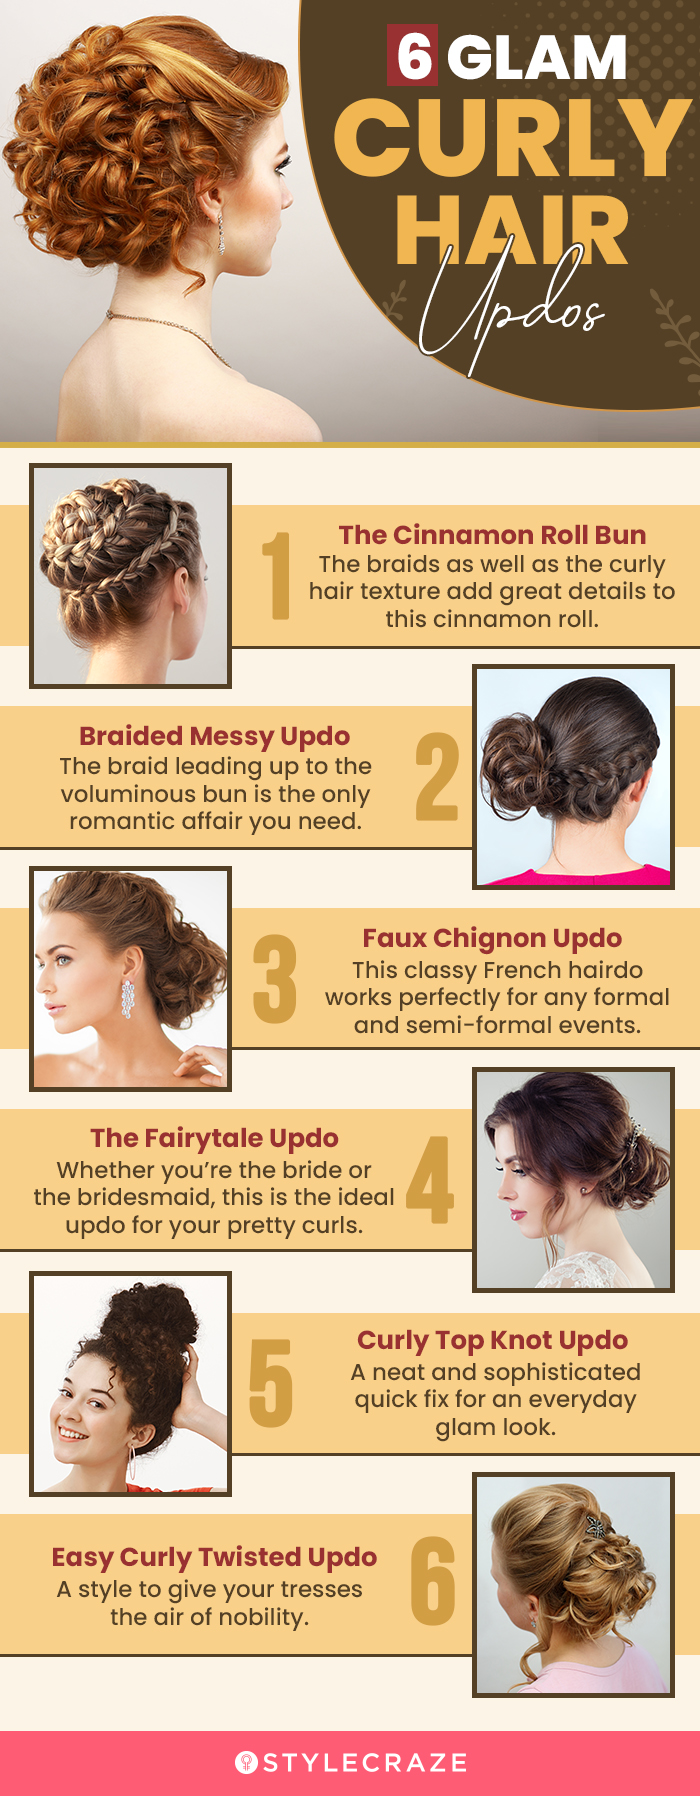 6 glam curly hair updos (infographic)